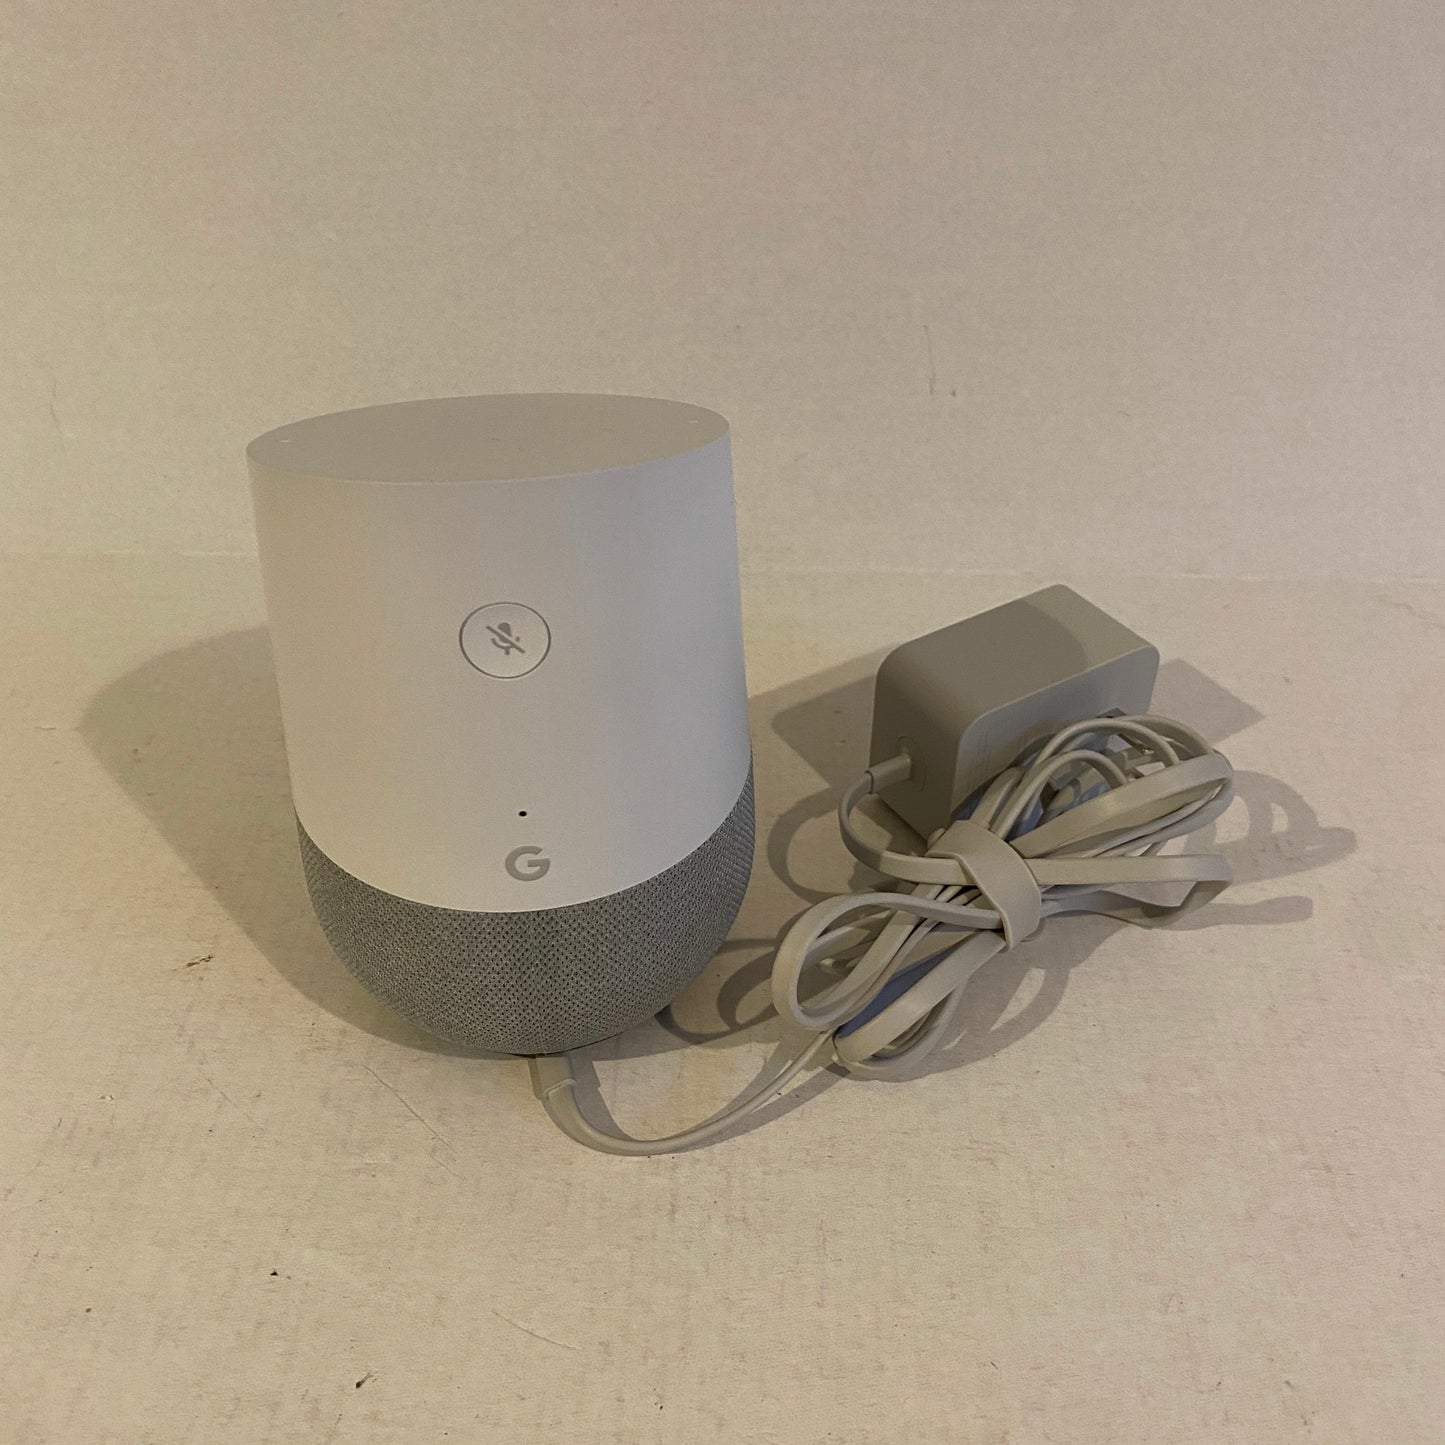 White Google Home Smart Speaker with Google Assistant